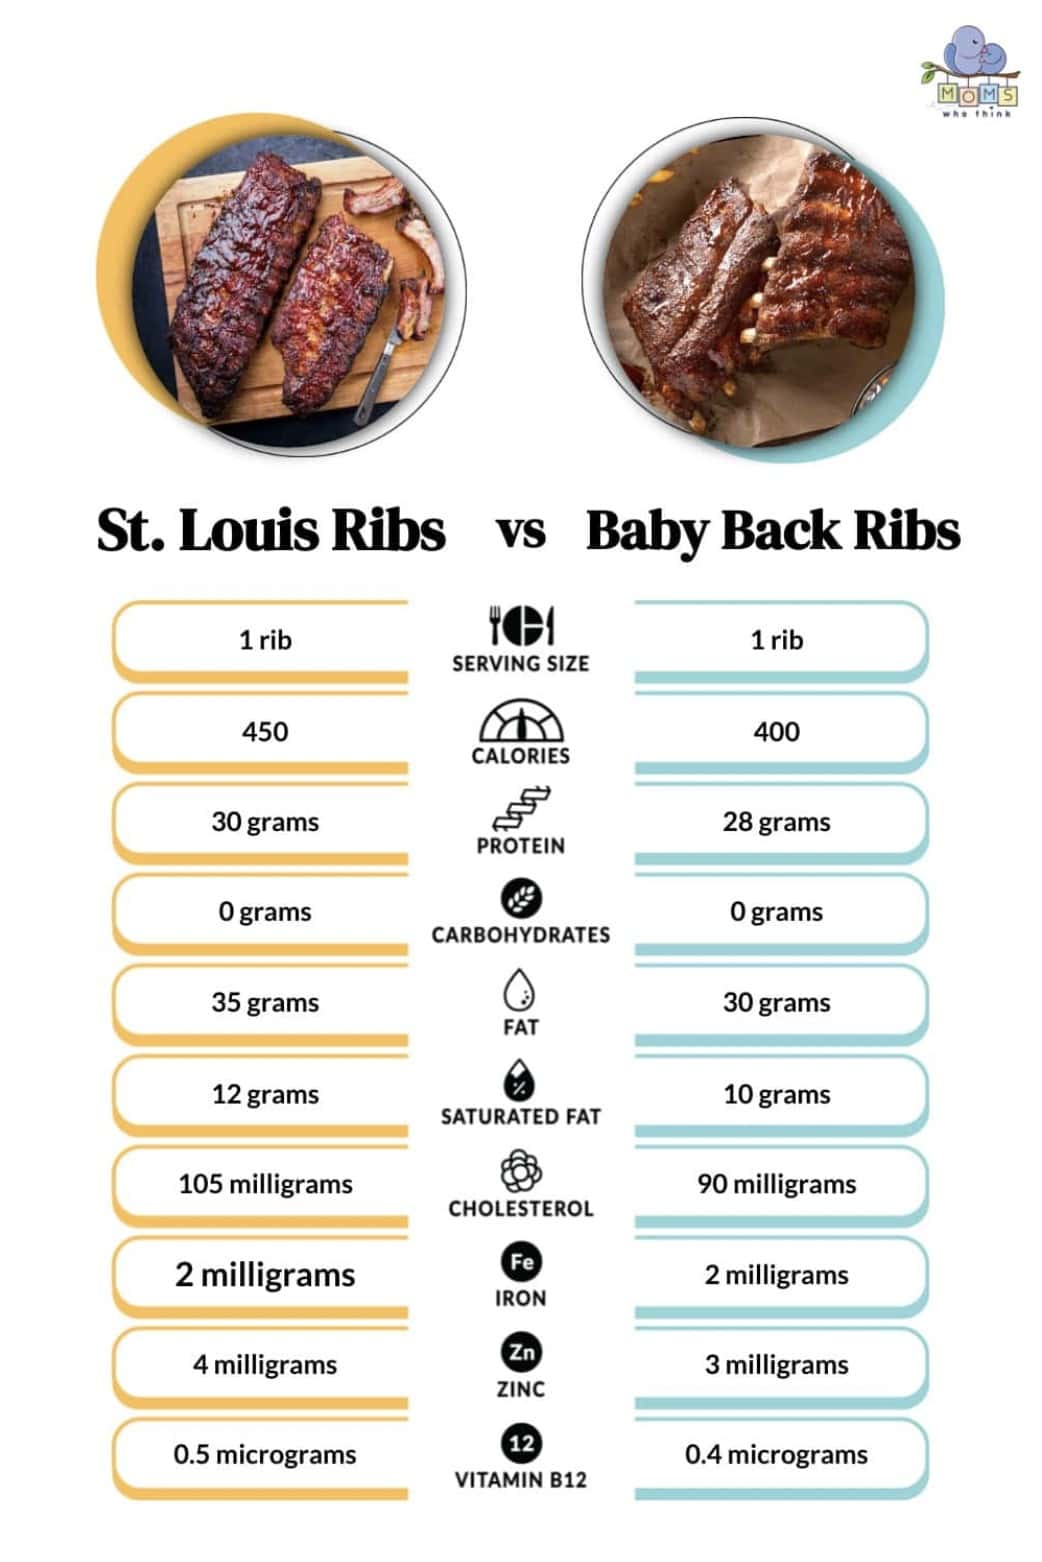 Ribs - Carolina, Memphis or St. Louis? What's the Difference